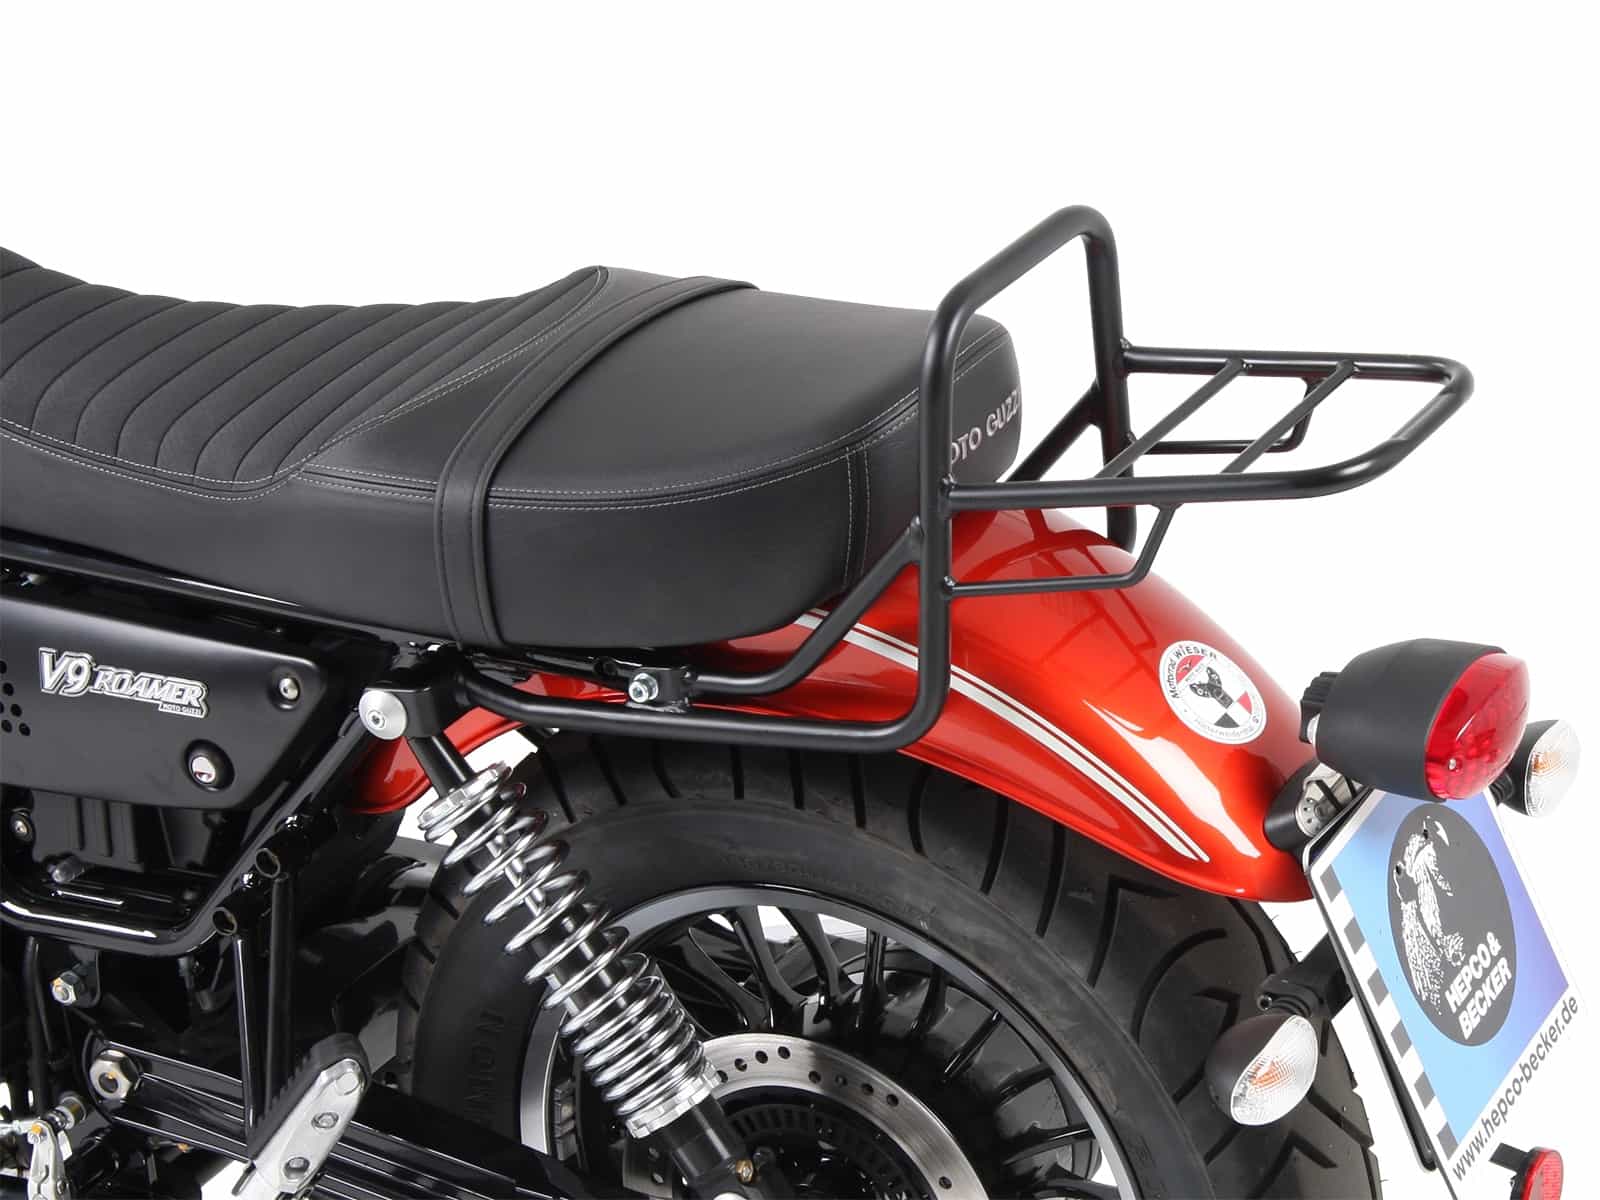 Topcase carrier tube-type black - for long seat for Moto Guzzi V9 Bobber/Special Edition (2021-) (long seat)